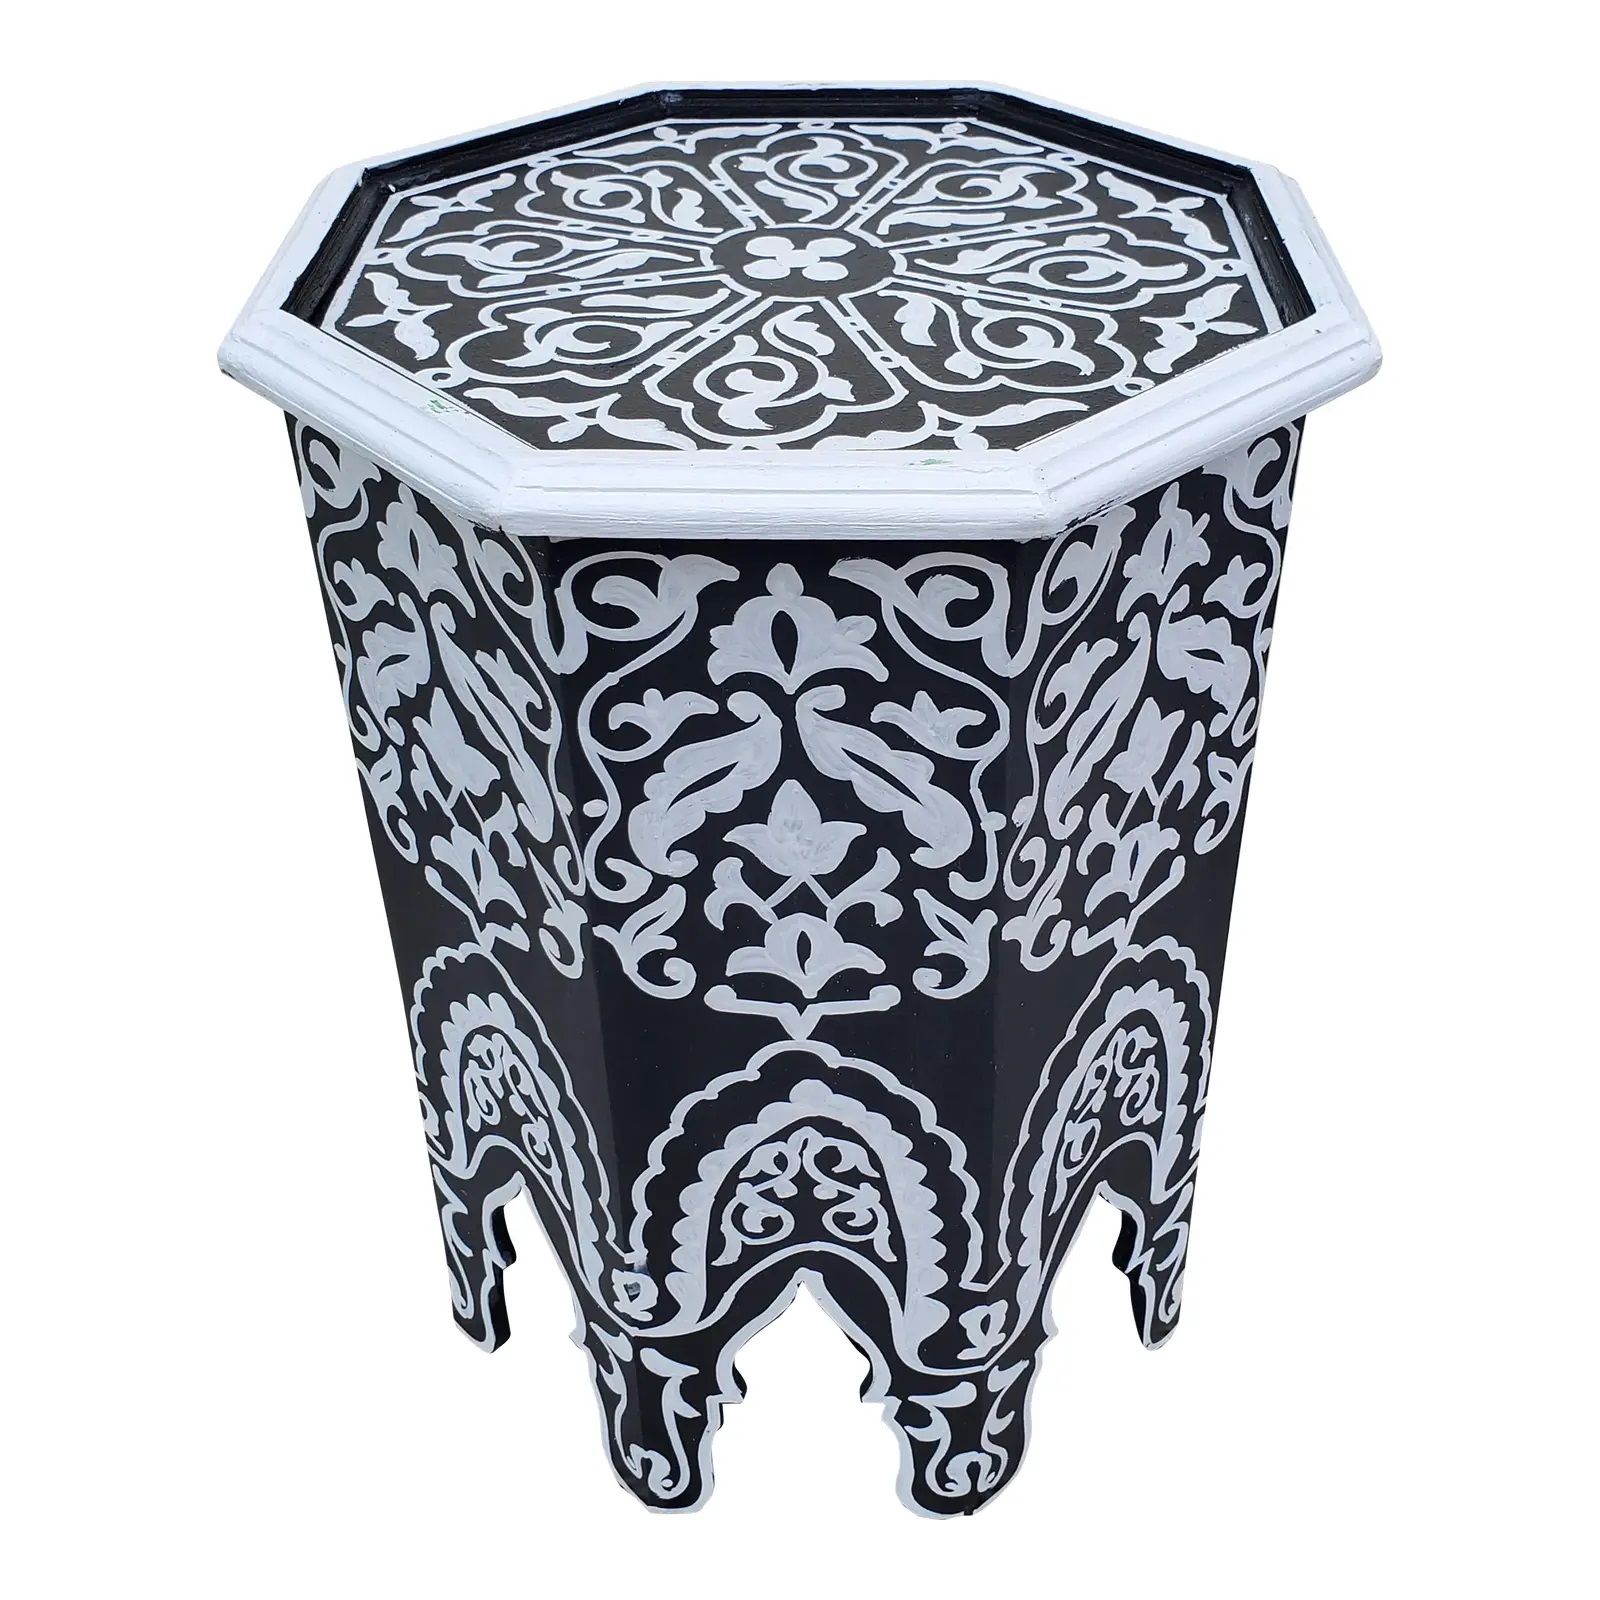 Moroccan Octagonal Hand Painted Wooden Side Table, Black And White Zouak